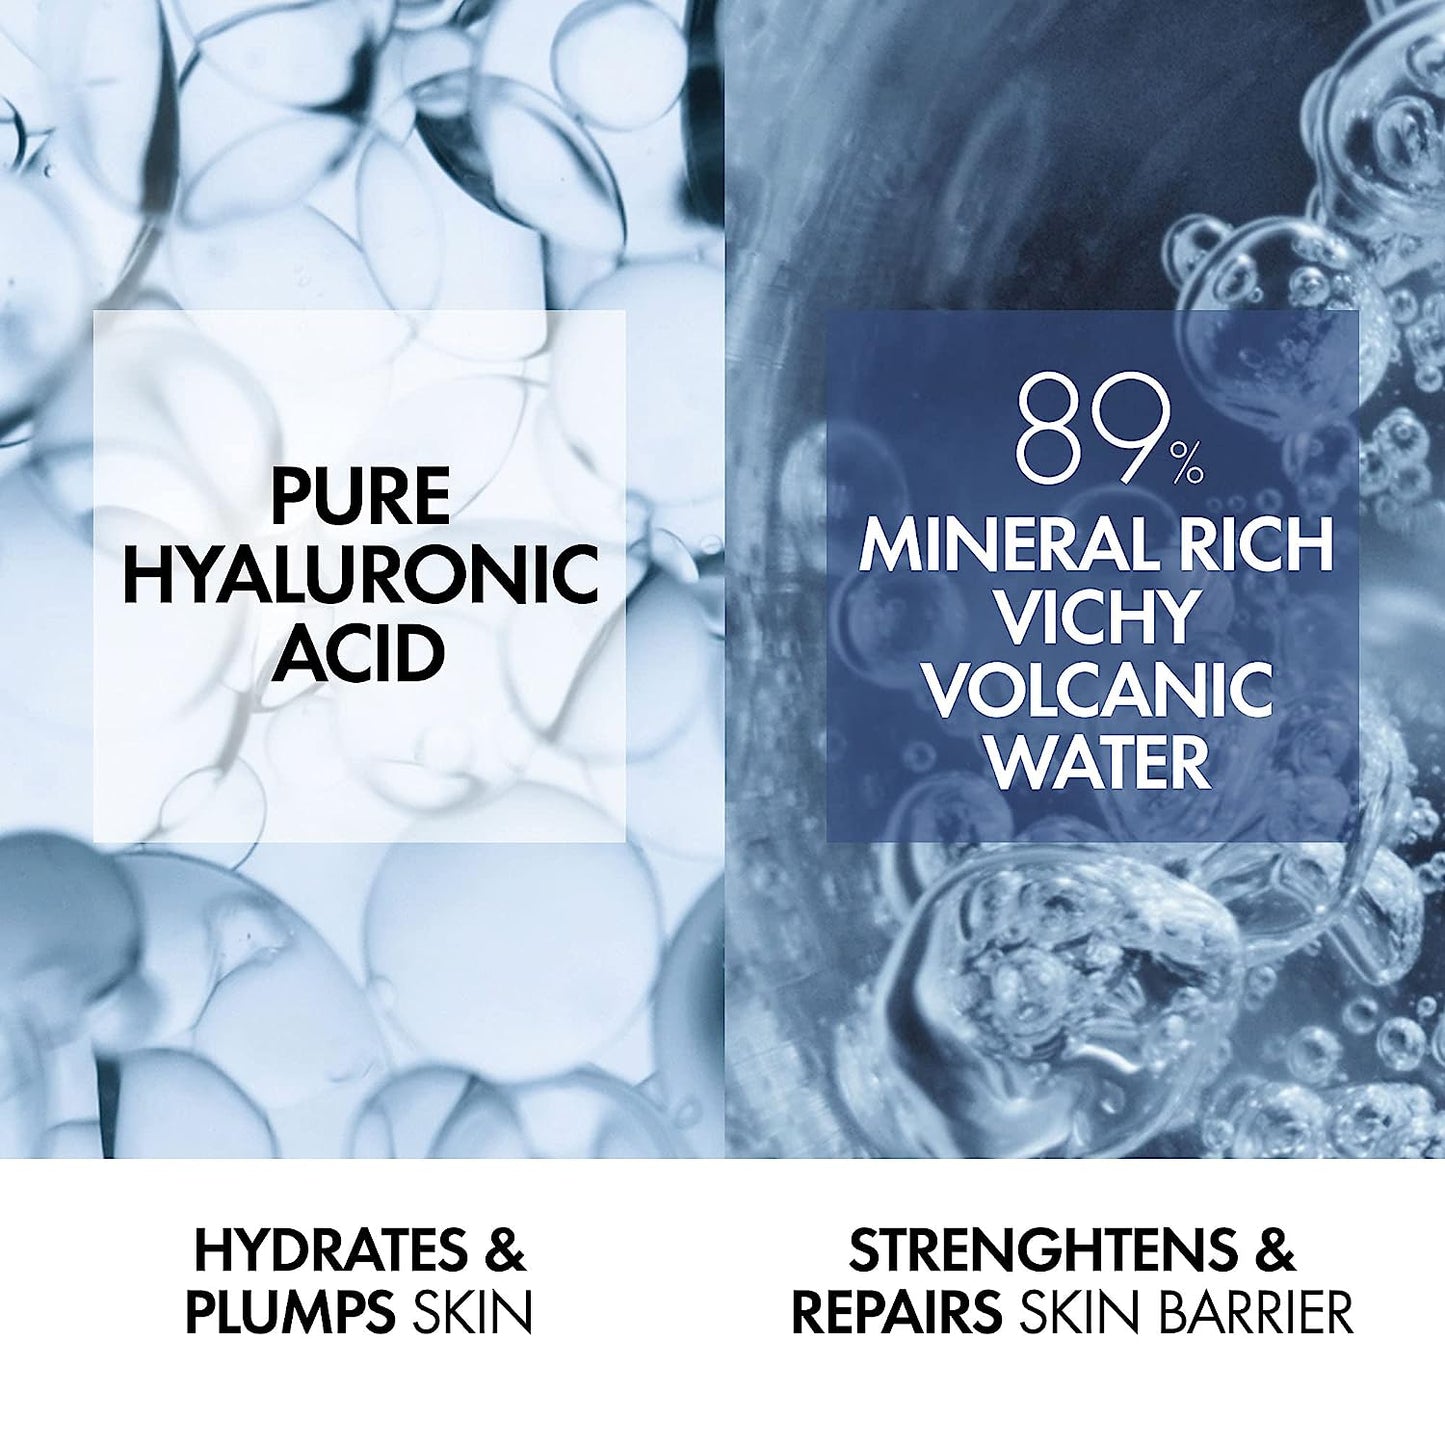 Vichy Mineral 89 Hyaluronic Acid Face Serum, Facial Gel Humectante y Puro Acido Hialuronico  Serum Humectante e Hidratante for Sensitive Skin and Dry Skin